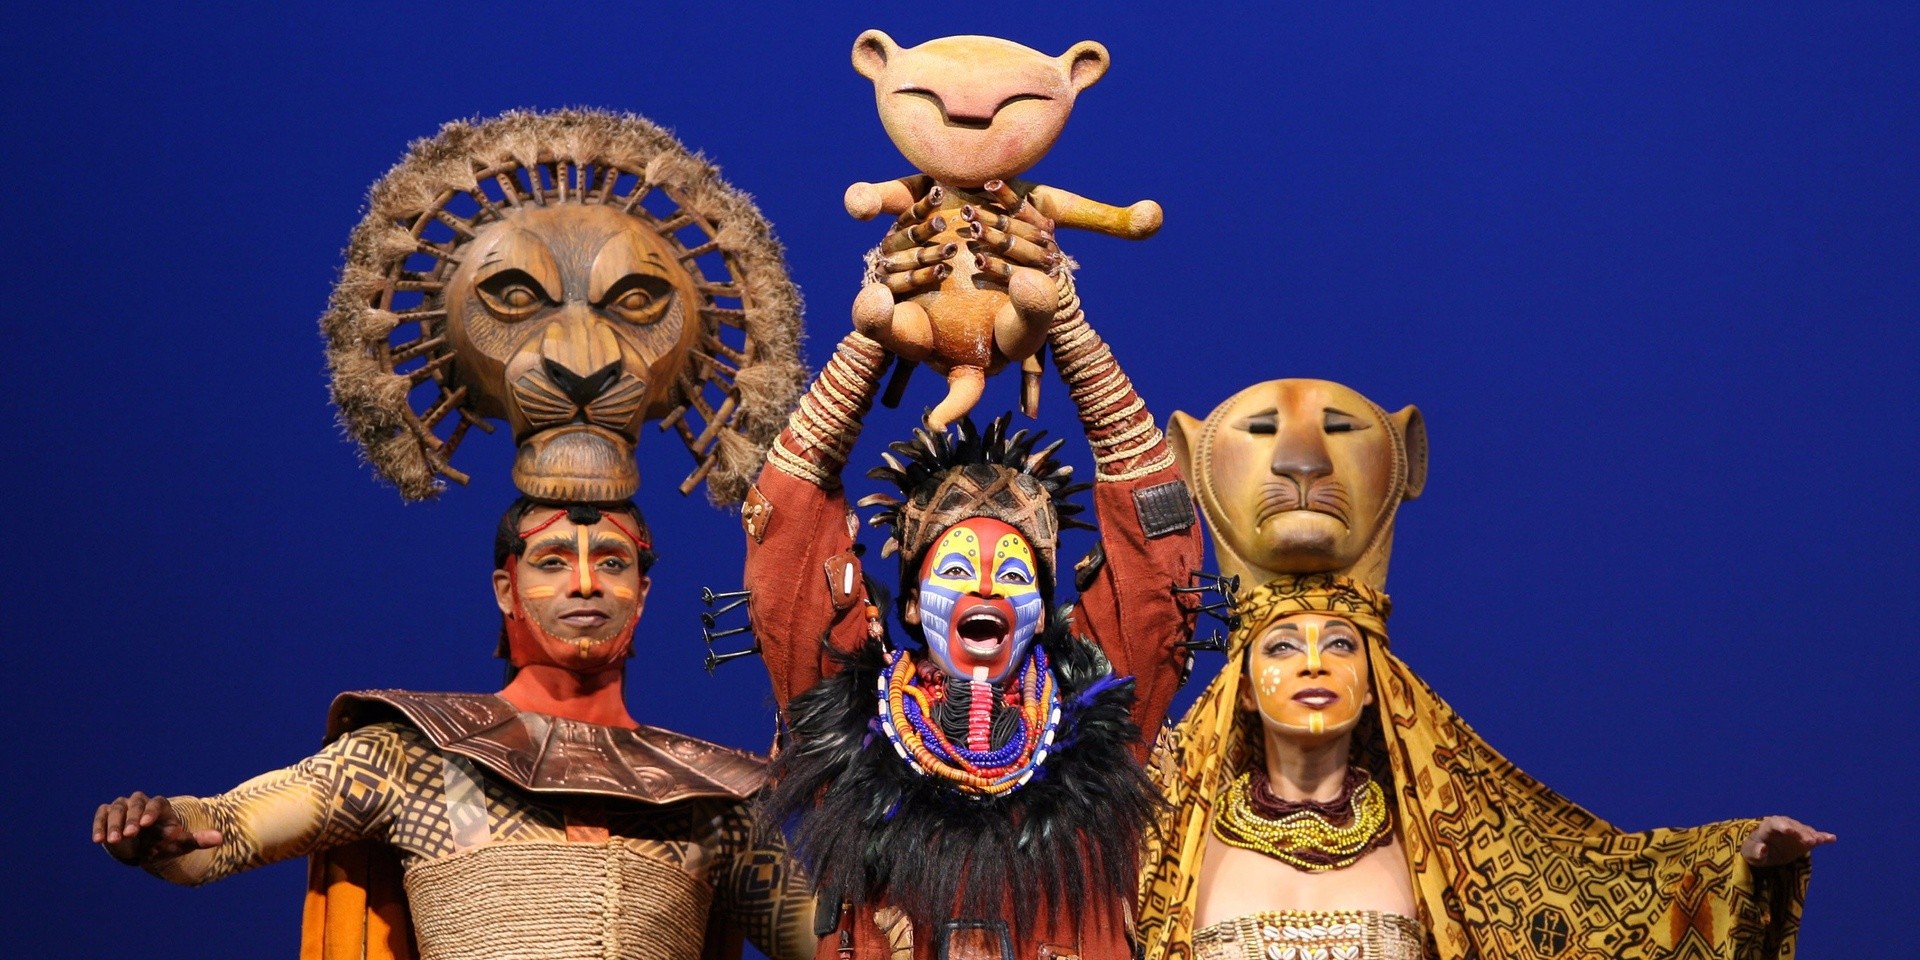 The Lion King musical returns to Singapore in June 2018